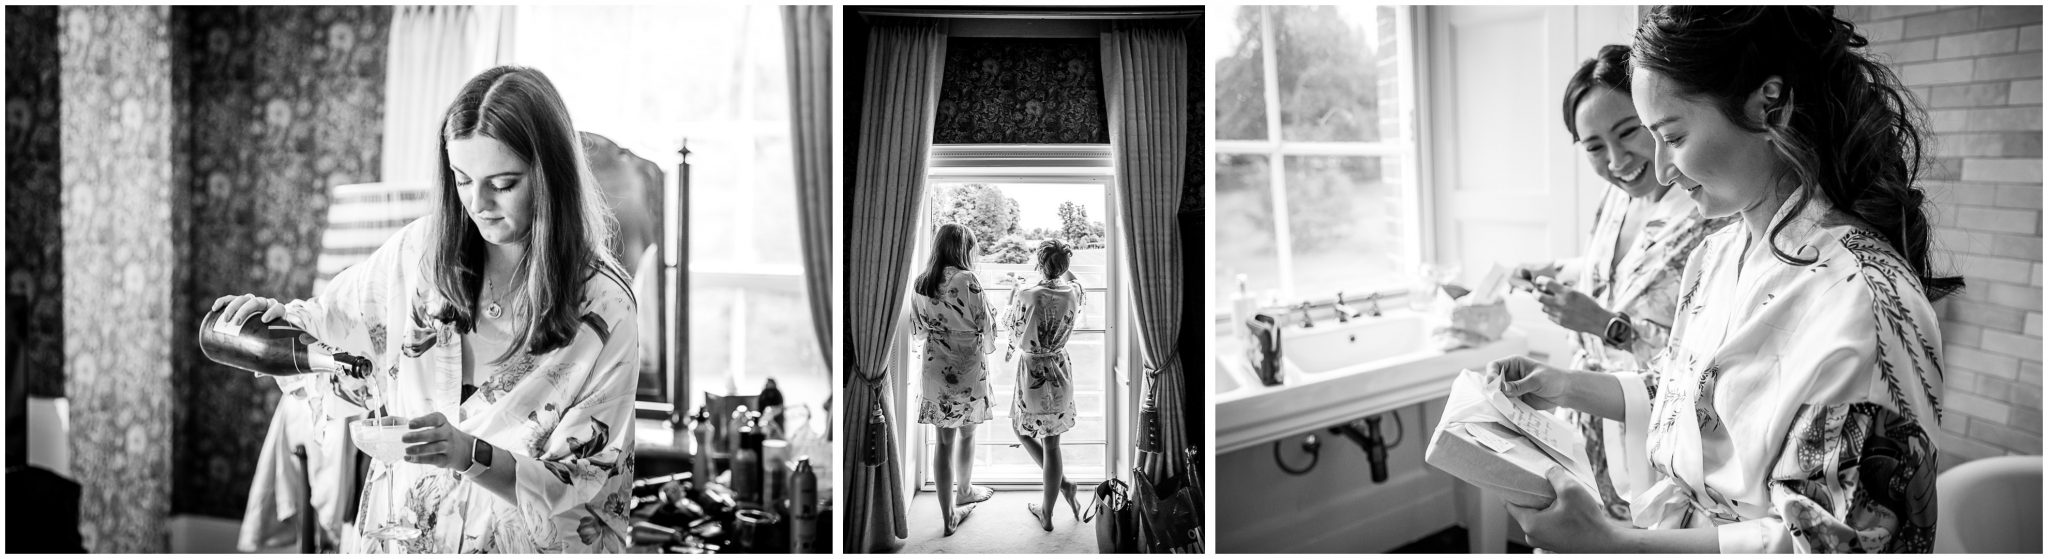 Bridesmaids in the dressing room black and white photos